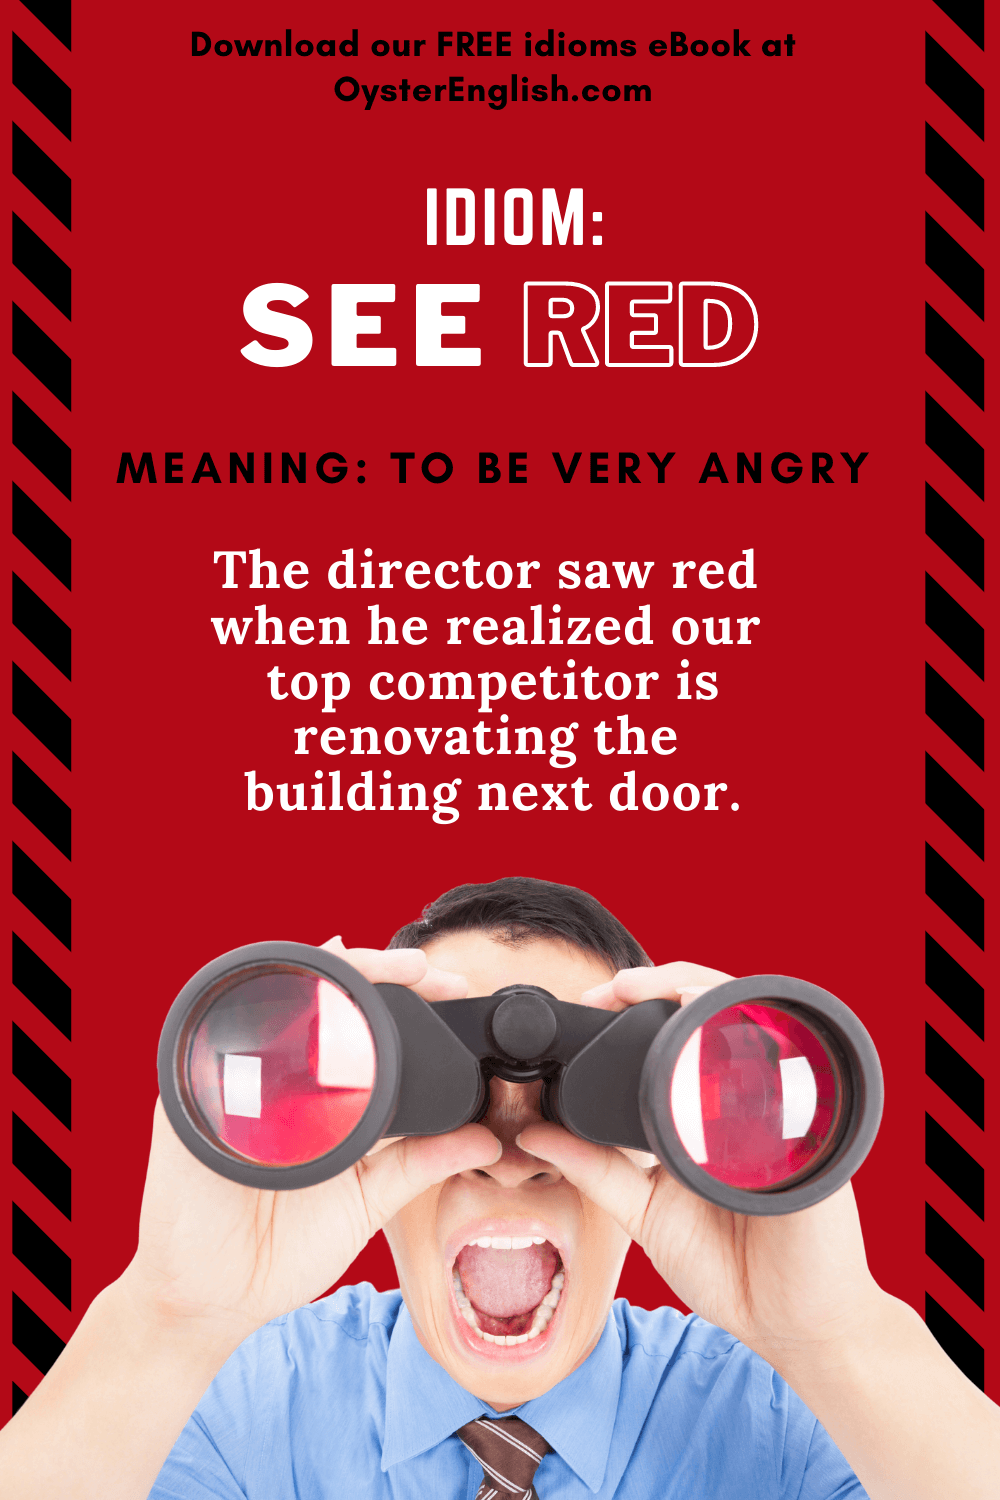 An angry man looks through red-colored binocular lenses (idiom "see red" means to be very angry). "The director saw red when he realized our top competitor is renovating the building next door."